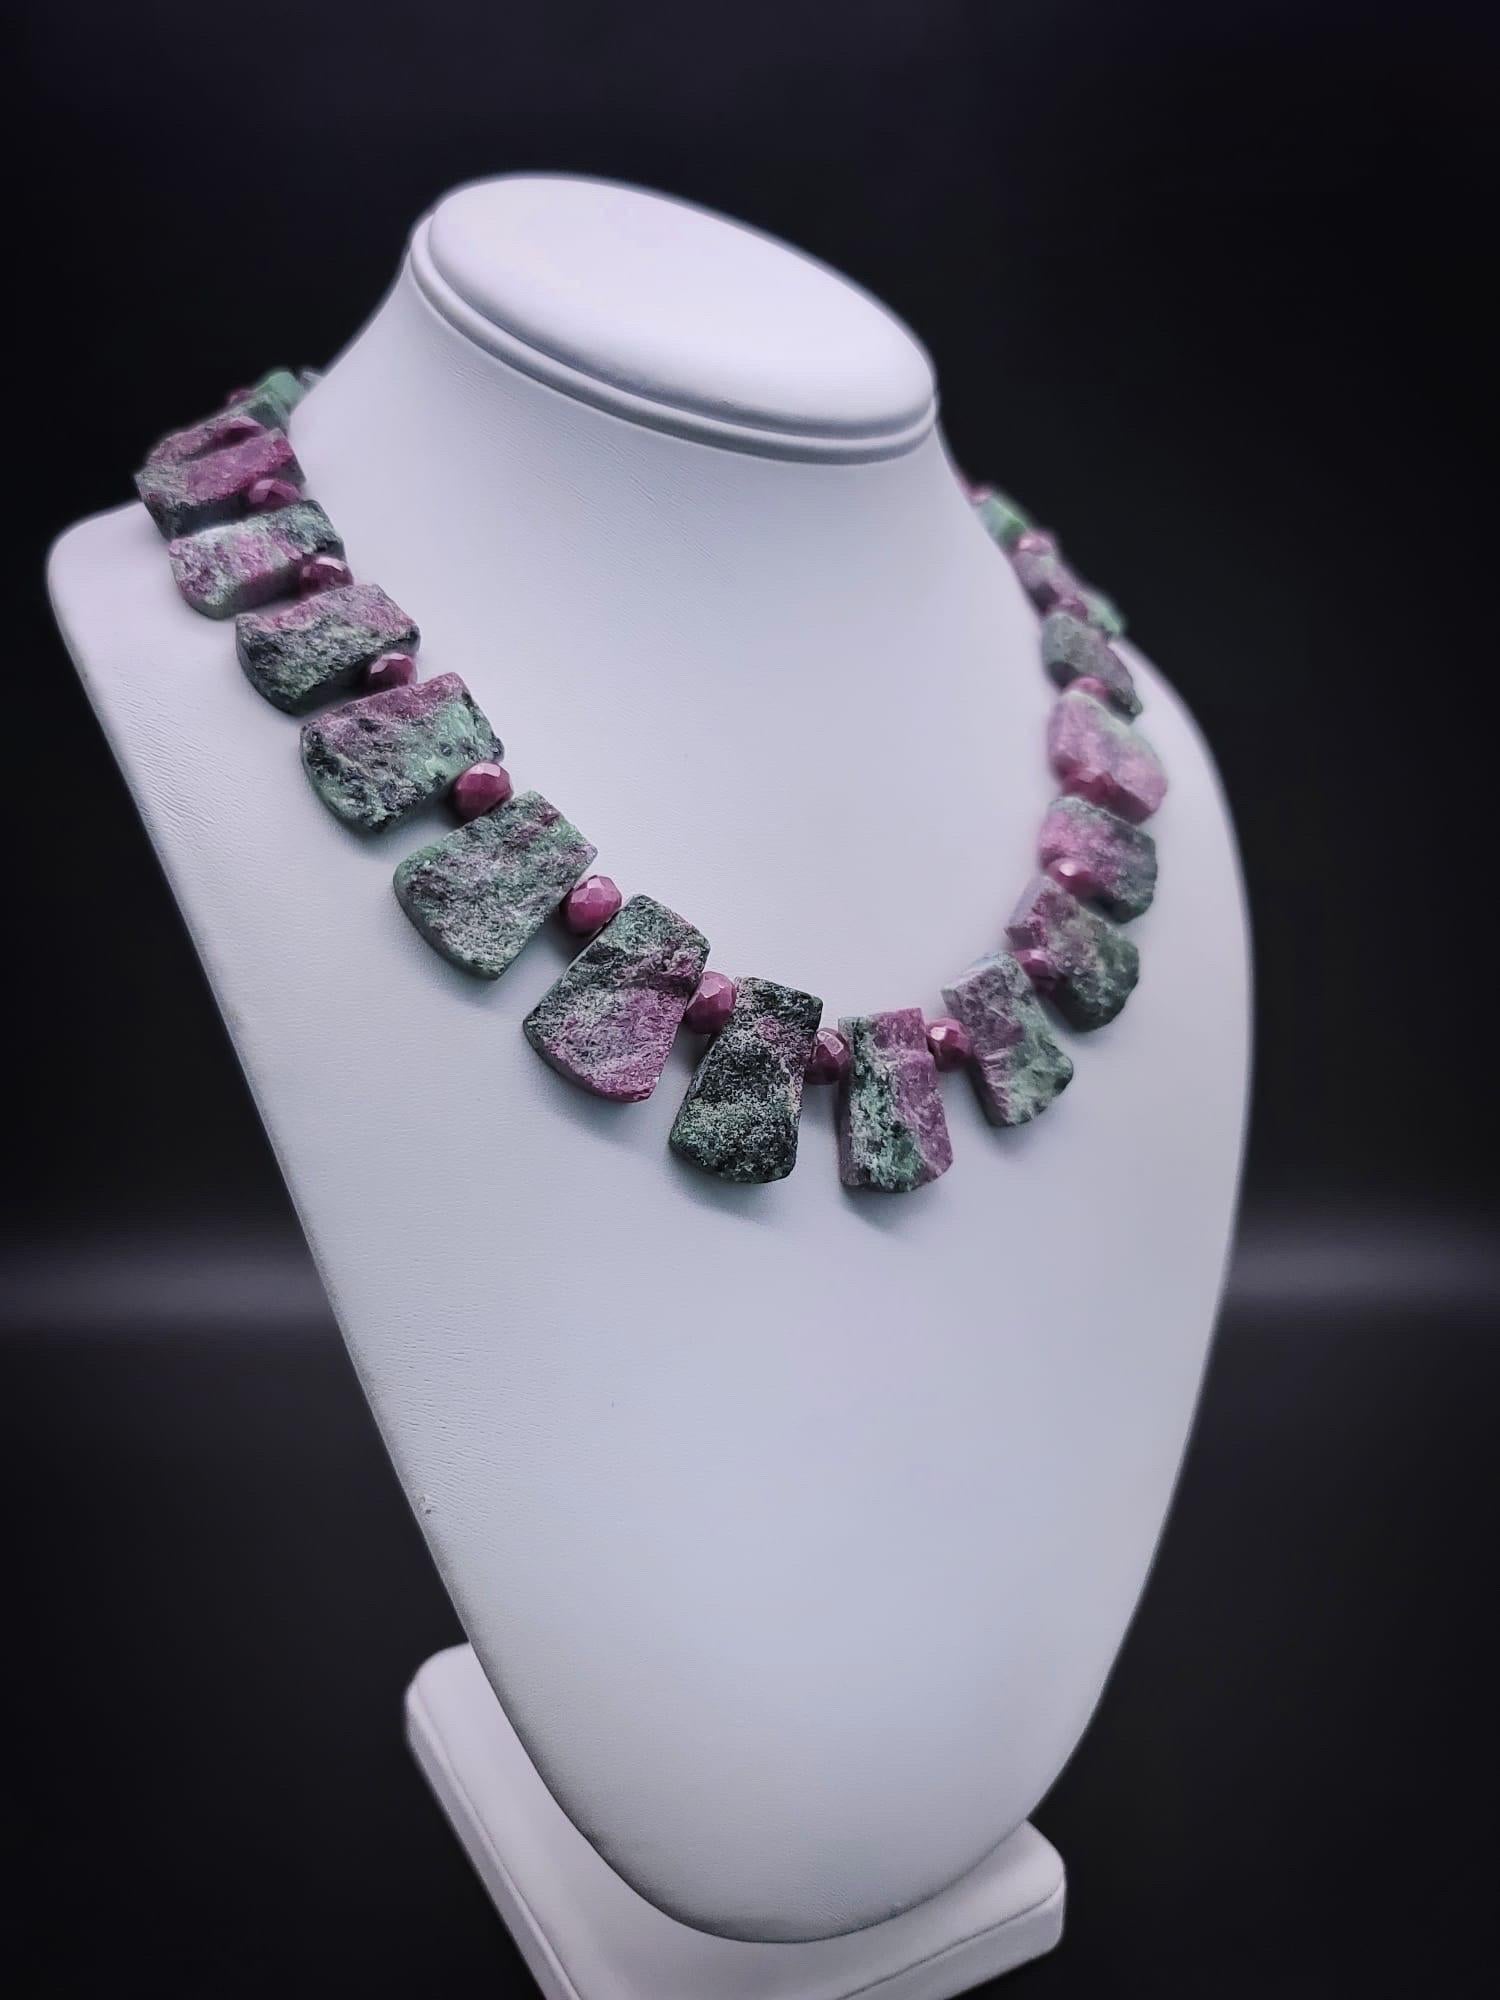 One-of-a-Kind Ruby Zoisite Collar: A Fusion of Rarity and Spiritual Elegance!

This remarkable collar showcases the allure of nature's unique beauty, crafted with uniform rough-cut Ruby Zoisite stones, each carefully polished on the backside to